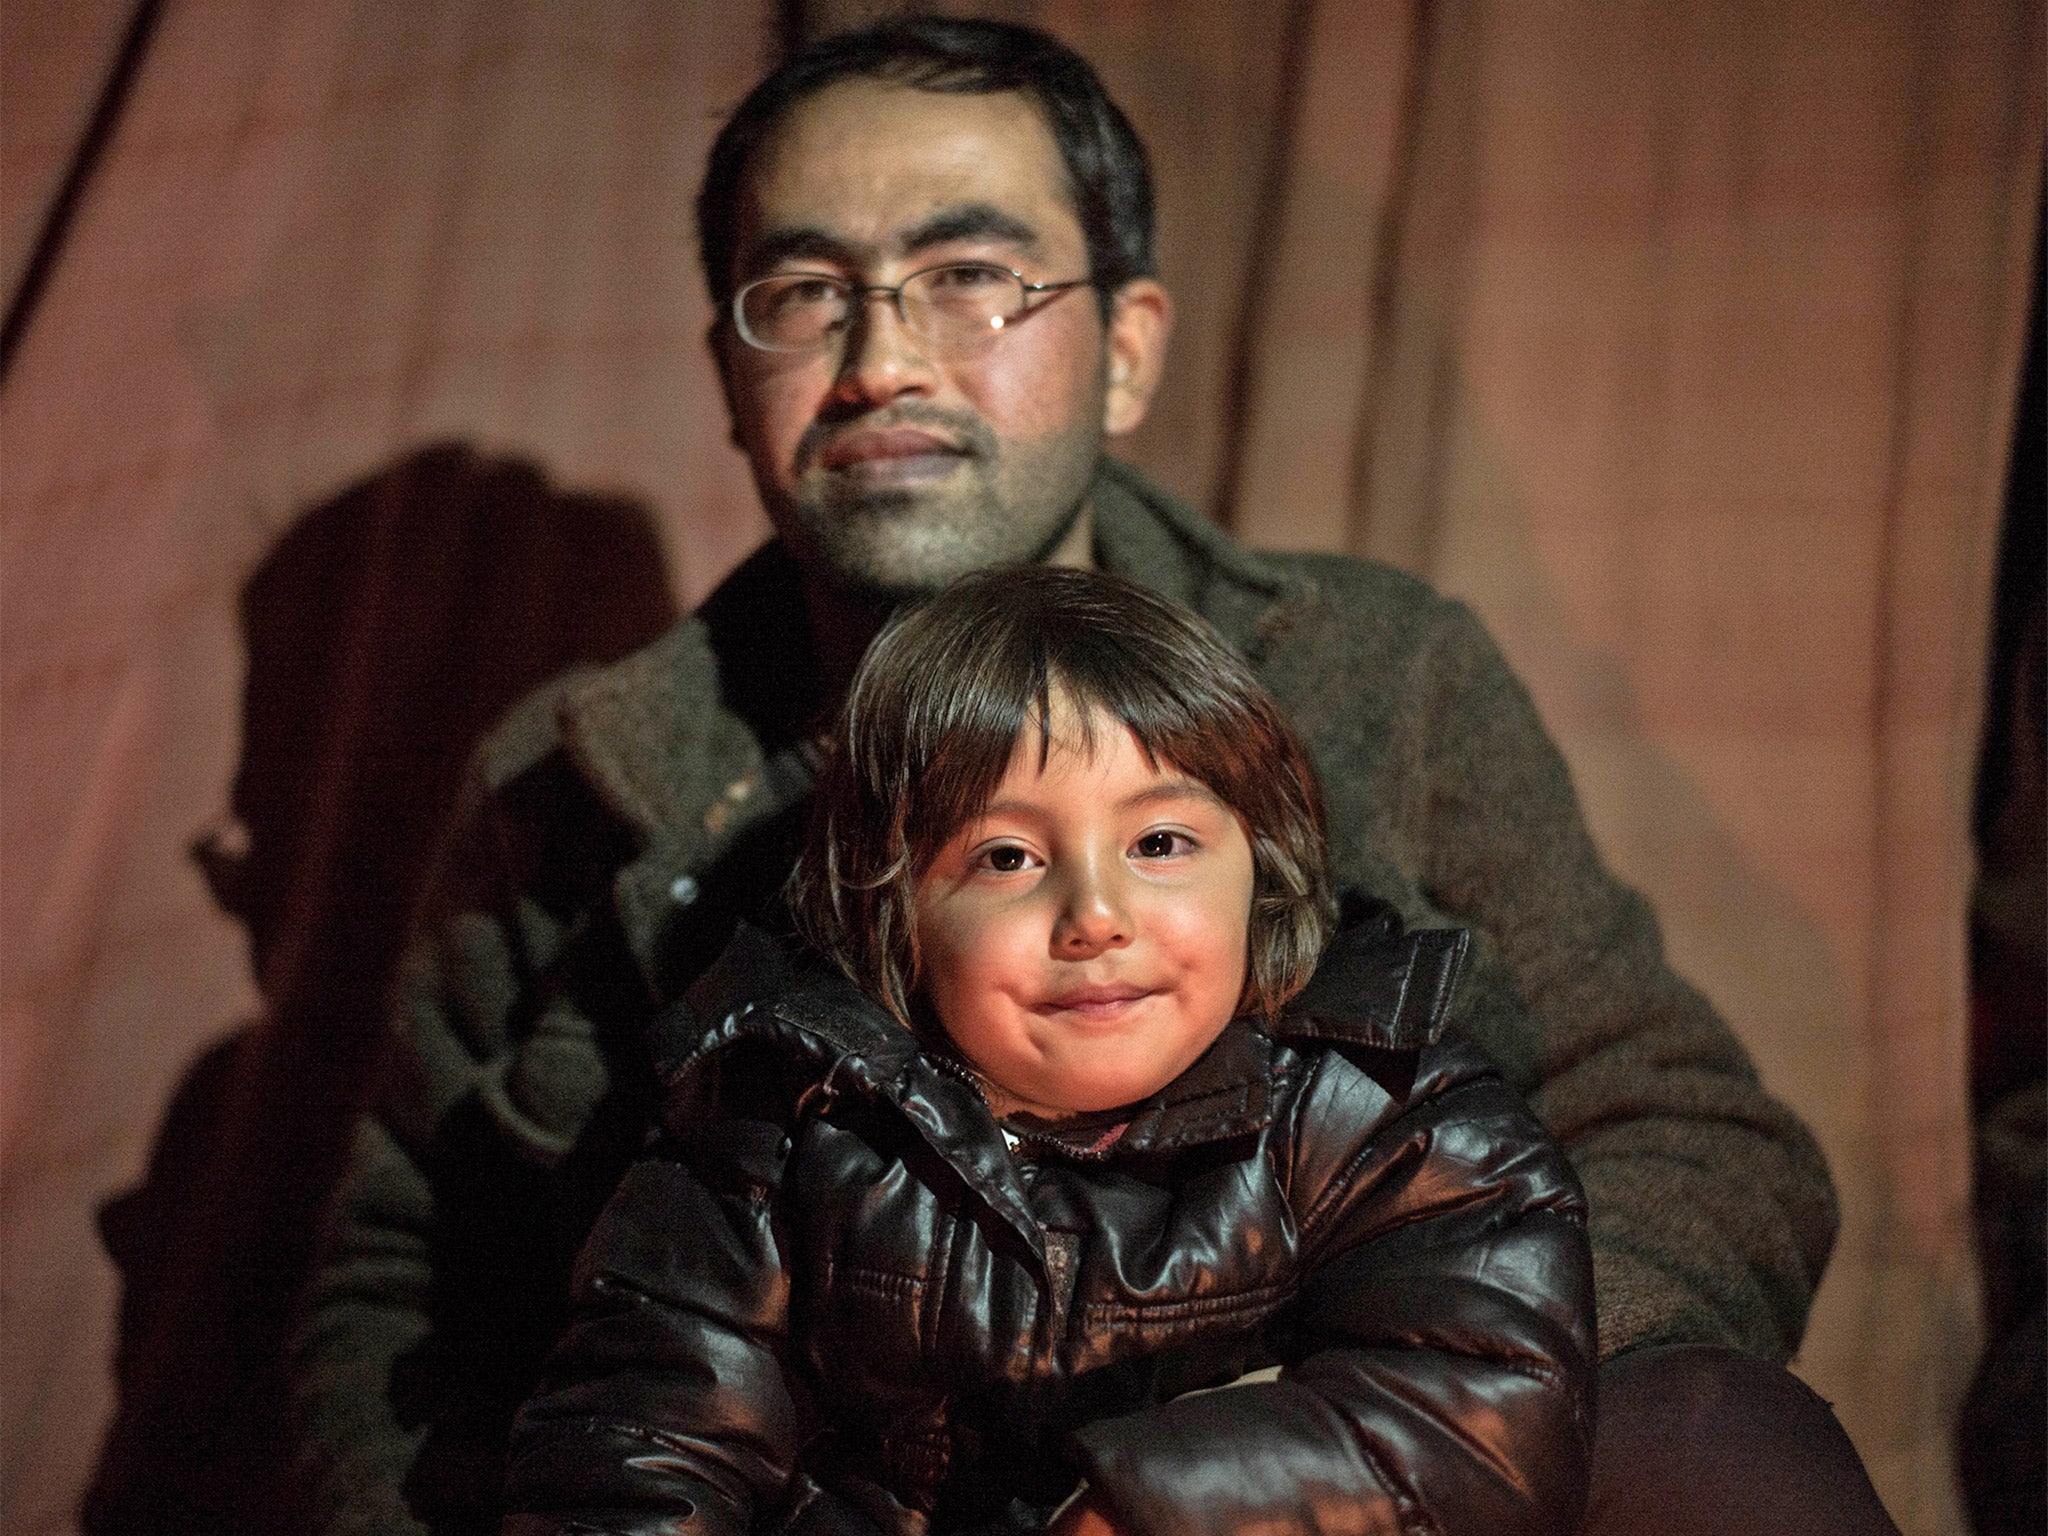 Bahar Ahmadi, 4, who is still living with her father, Reza, in the refugee camp in Calais